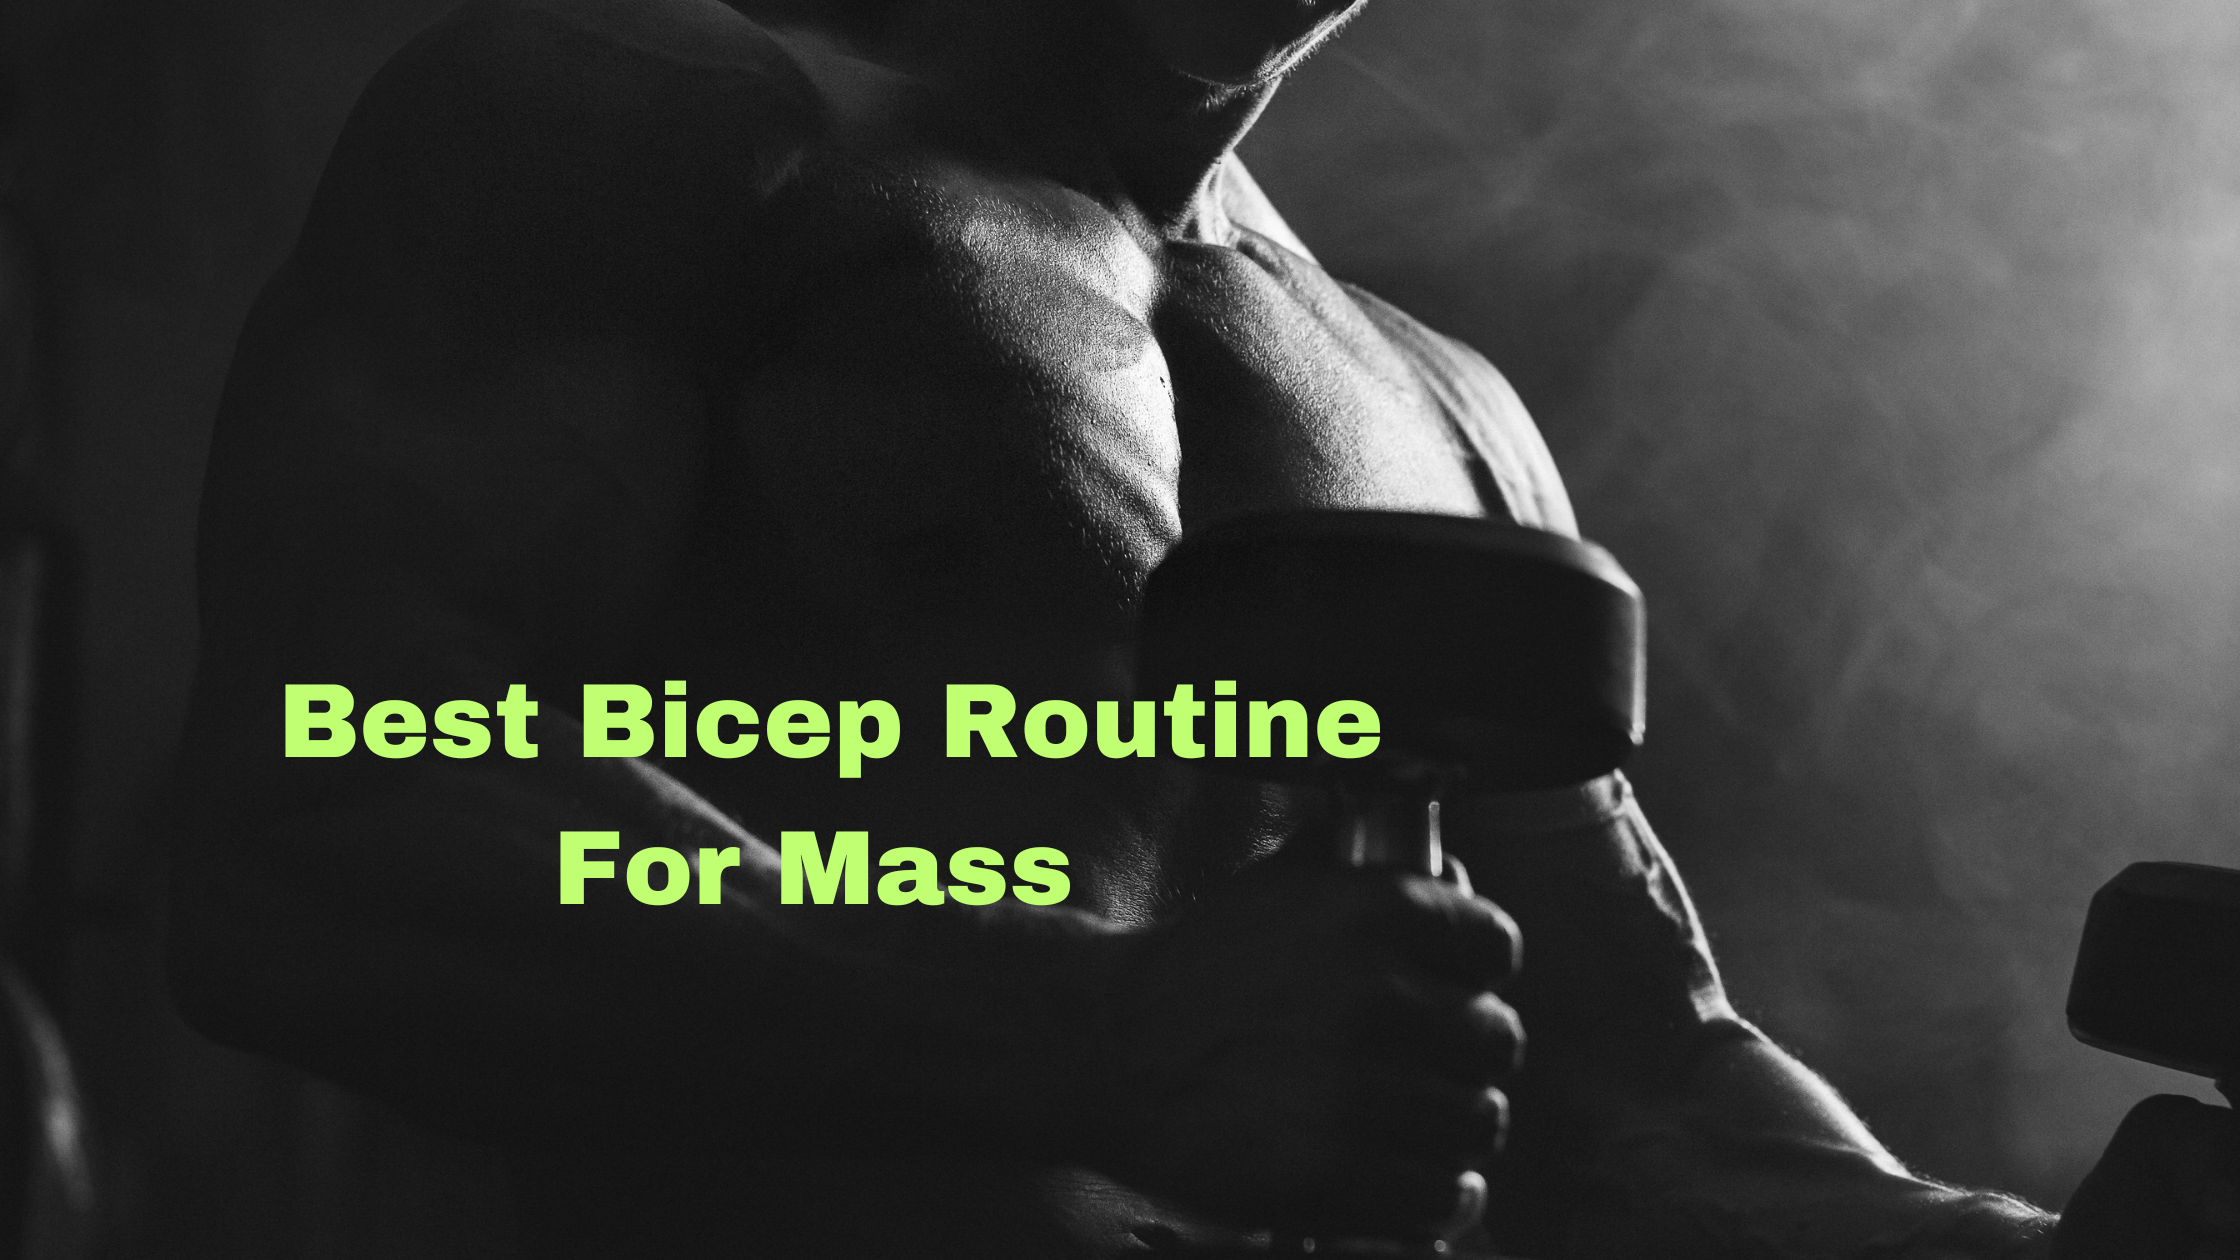 Best bicep routine for mass : The #1 Mass-Building Workout